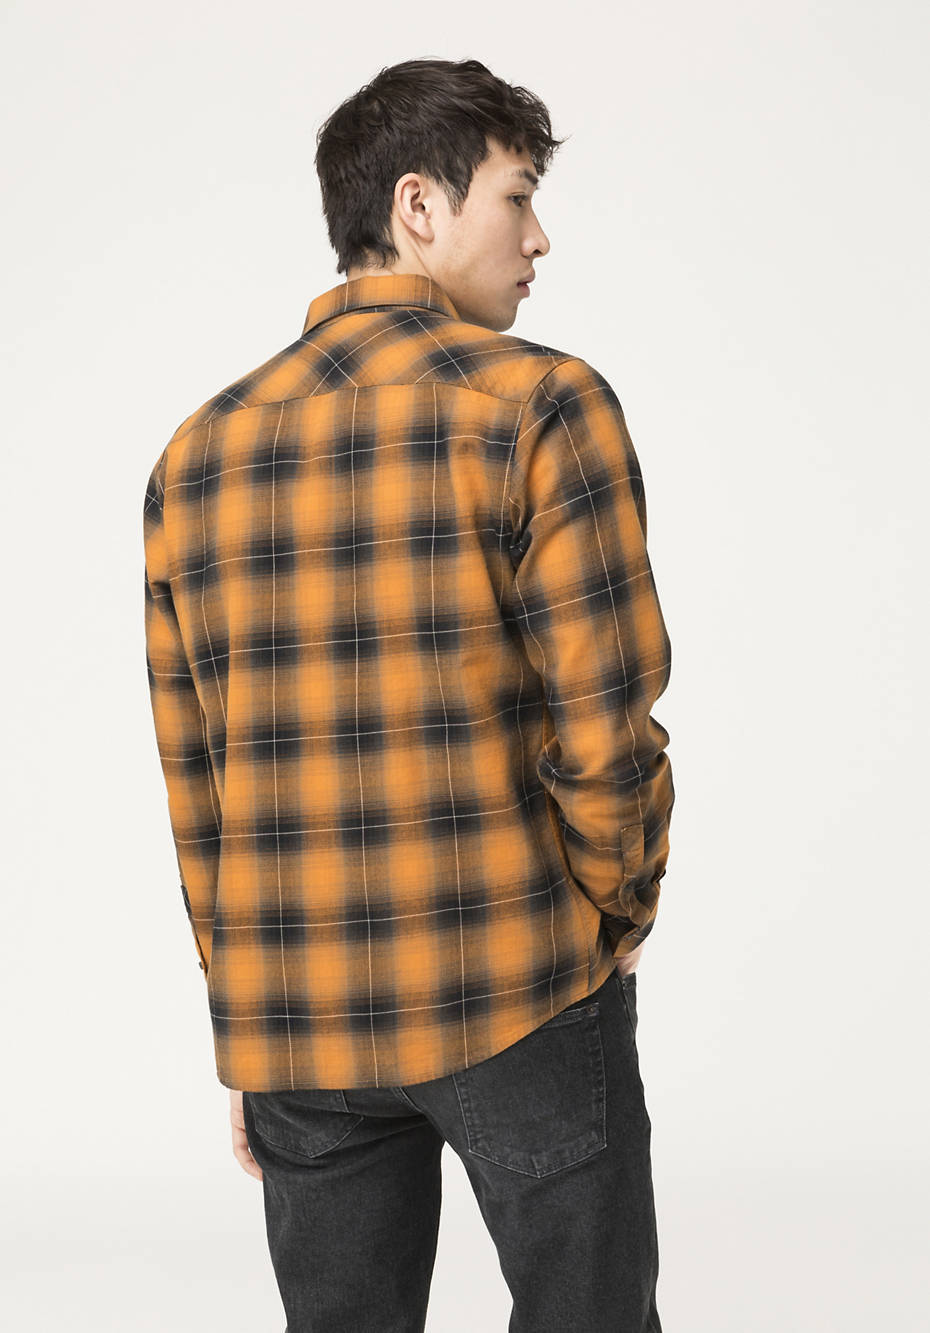 Flannel shirt made from pure organic cotton